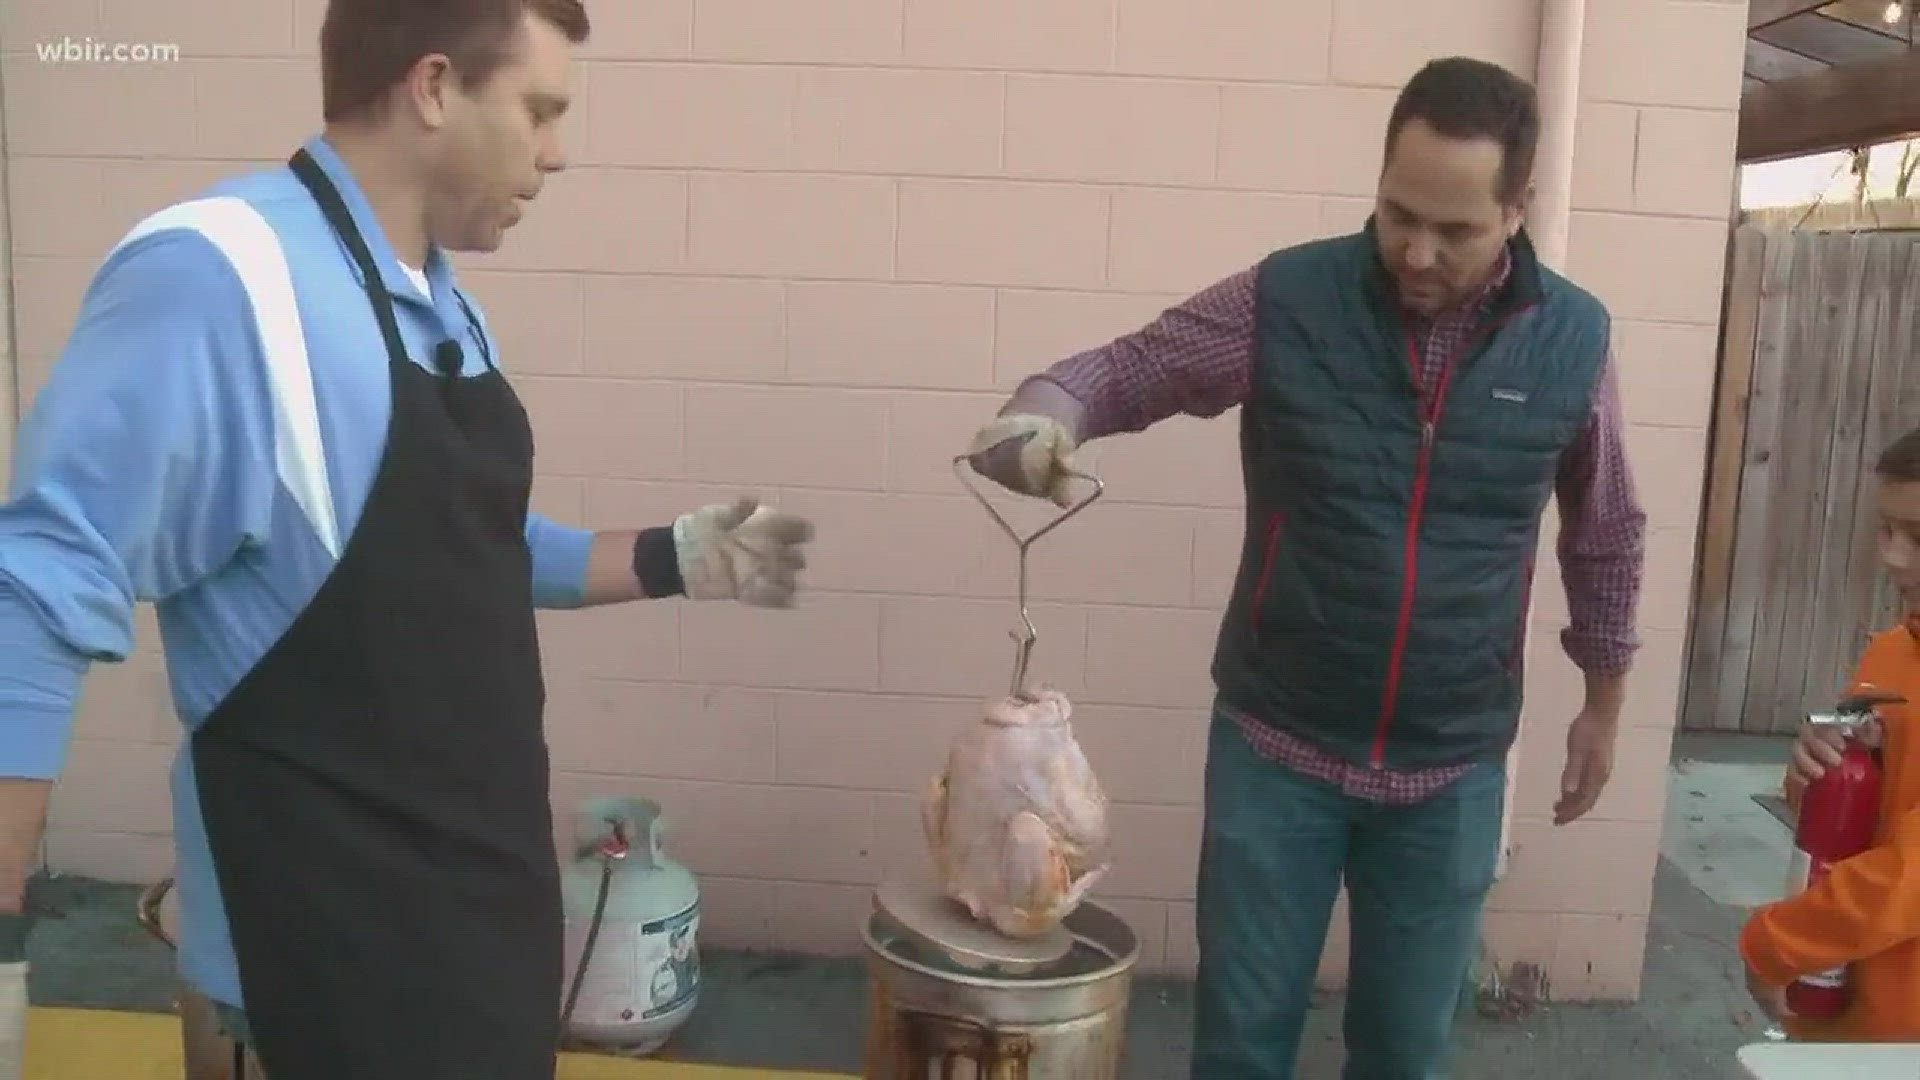 Matt Beeler with Big Kahuna Wings walks Seth Grossman through deep frying a turkey safely for the holidays. For more information visit bigkahunawings.com
November 21, 2017-4pm